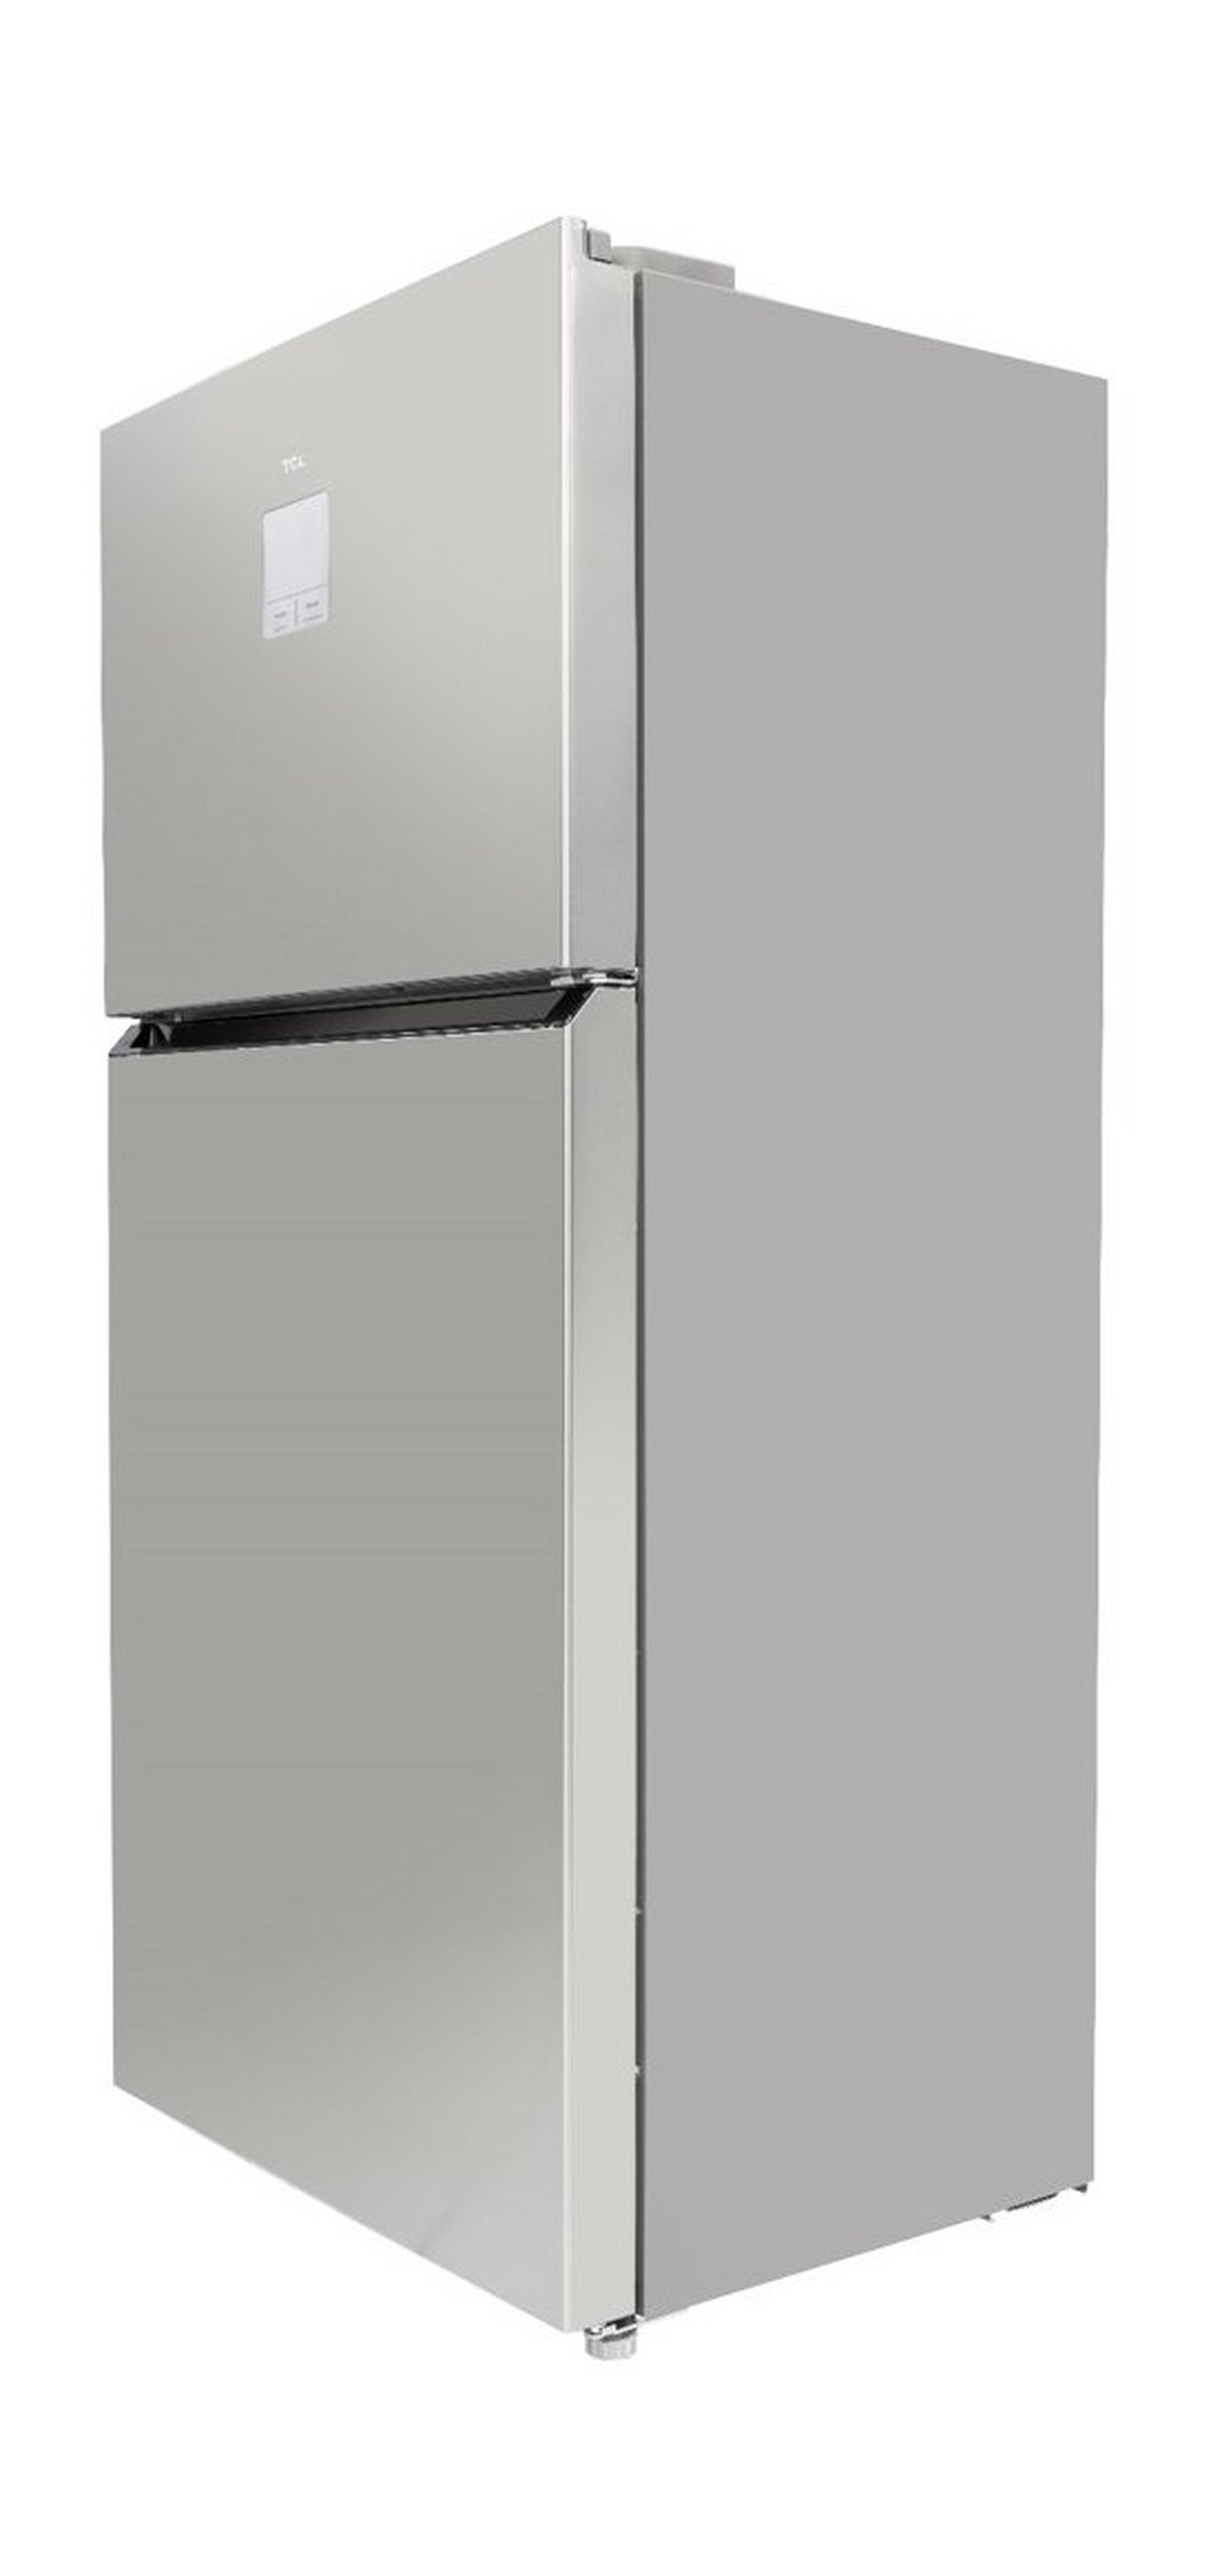 TCL Top Mount Refrigerator, 19CFT, 538-Liters, TRF-545WEX - Stainless Steel